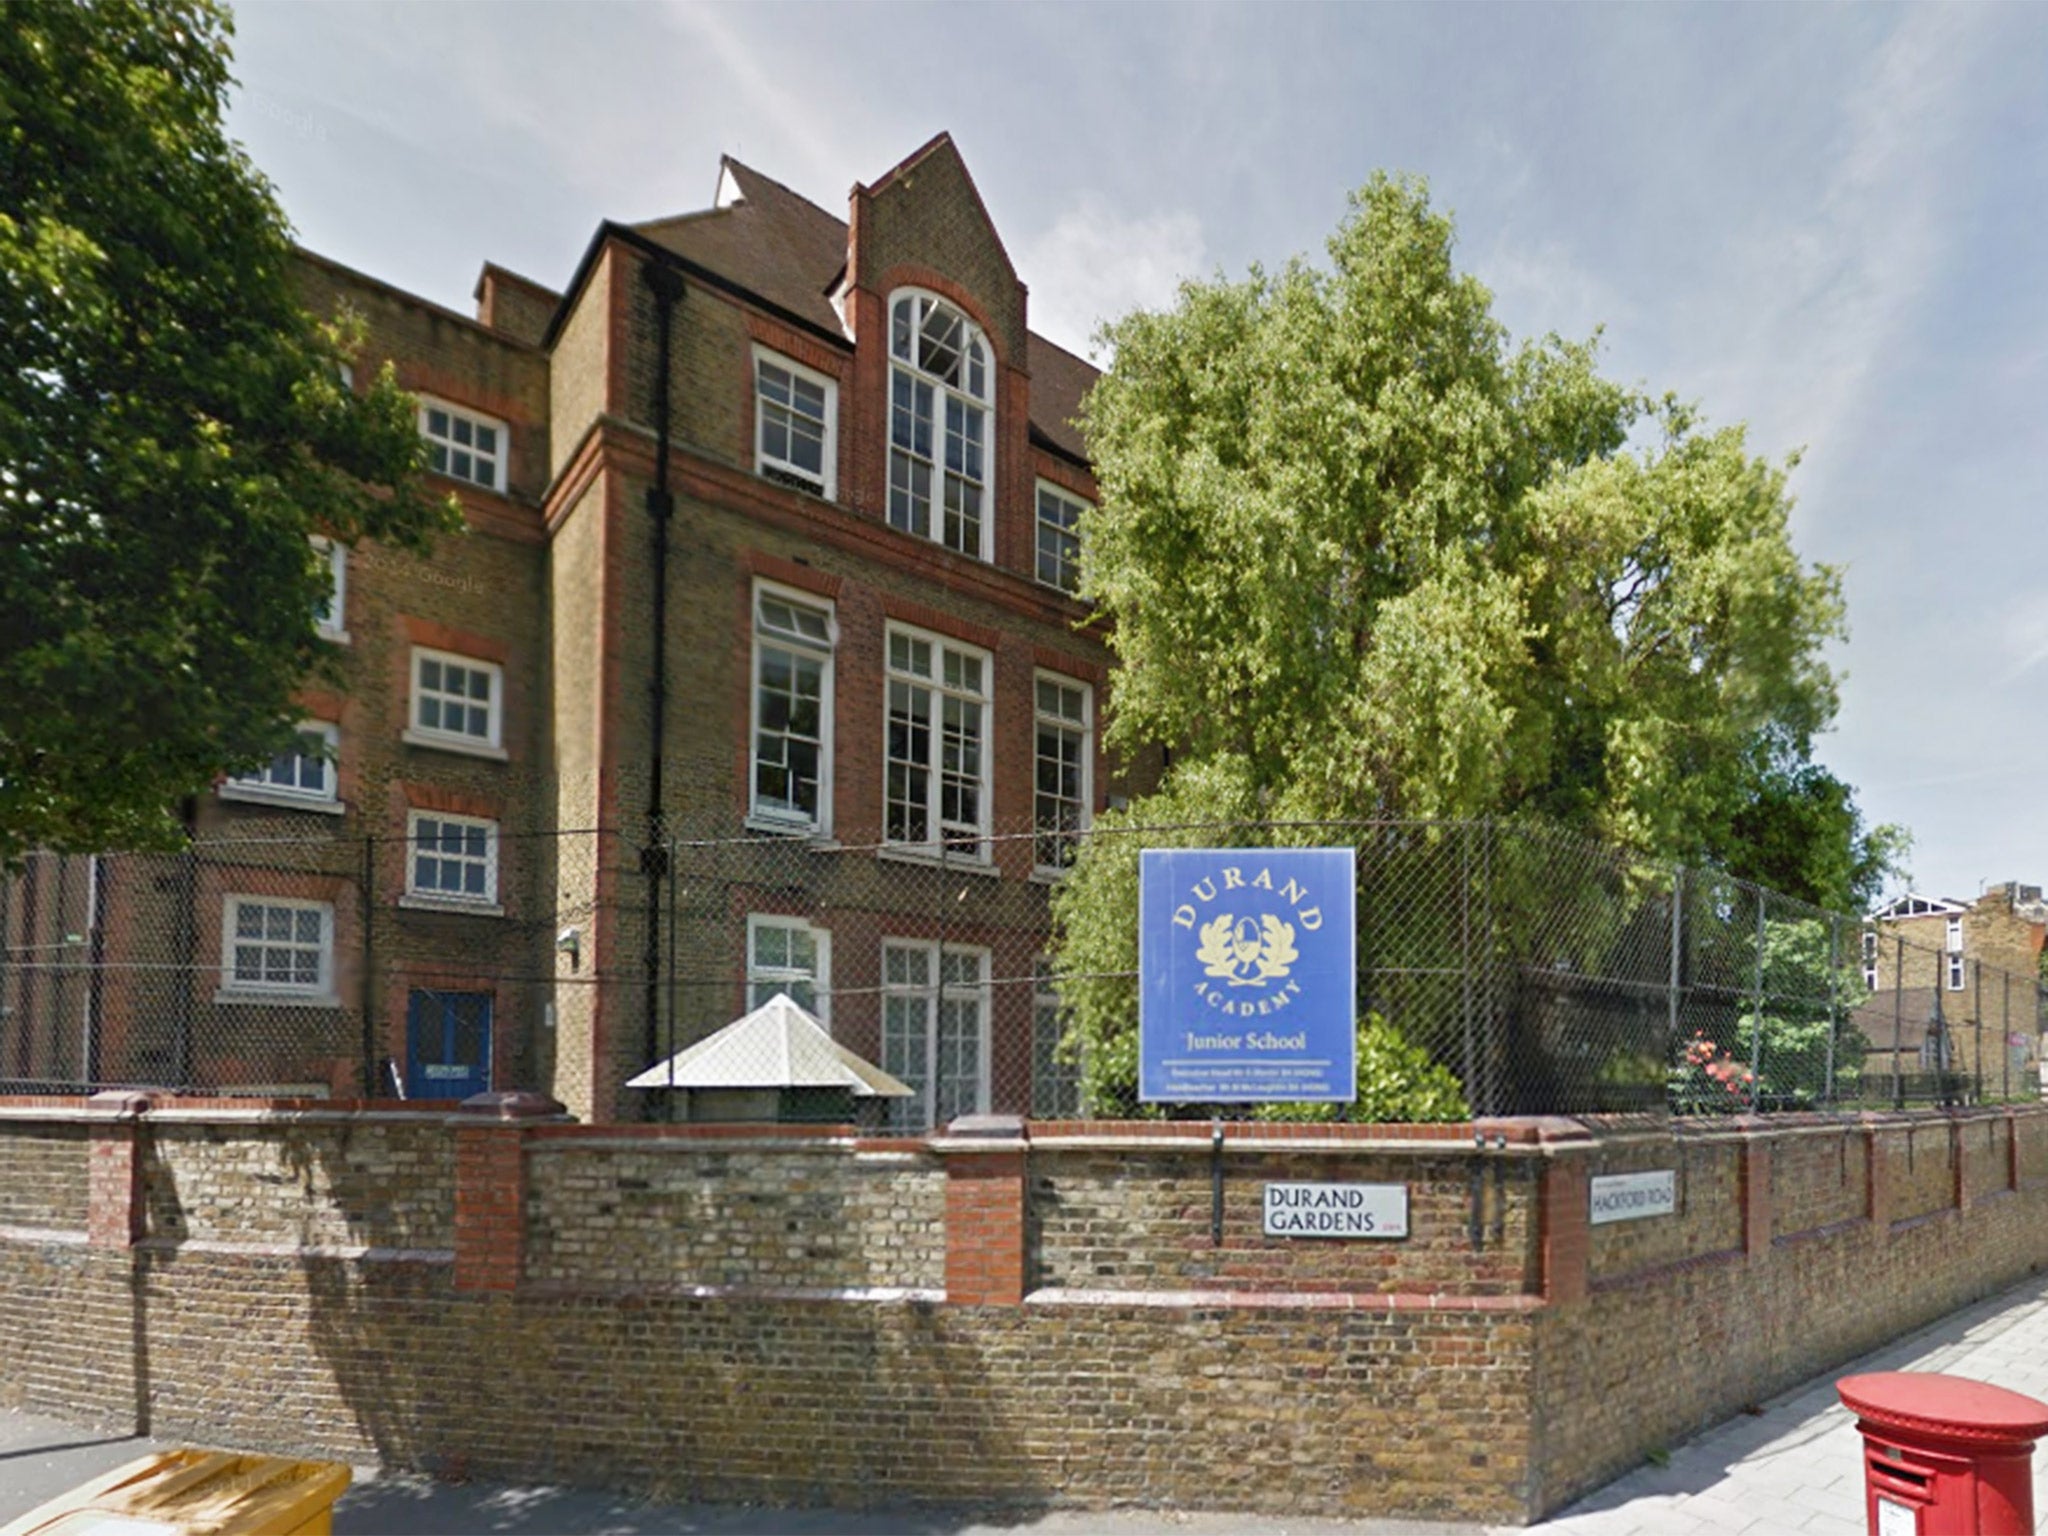 Durand Academy in Stockwell, south London